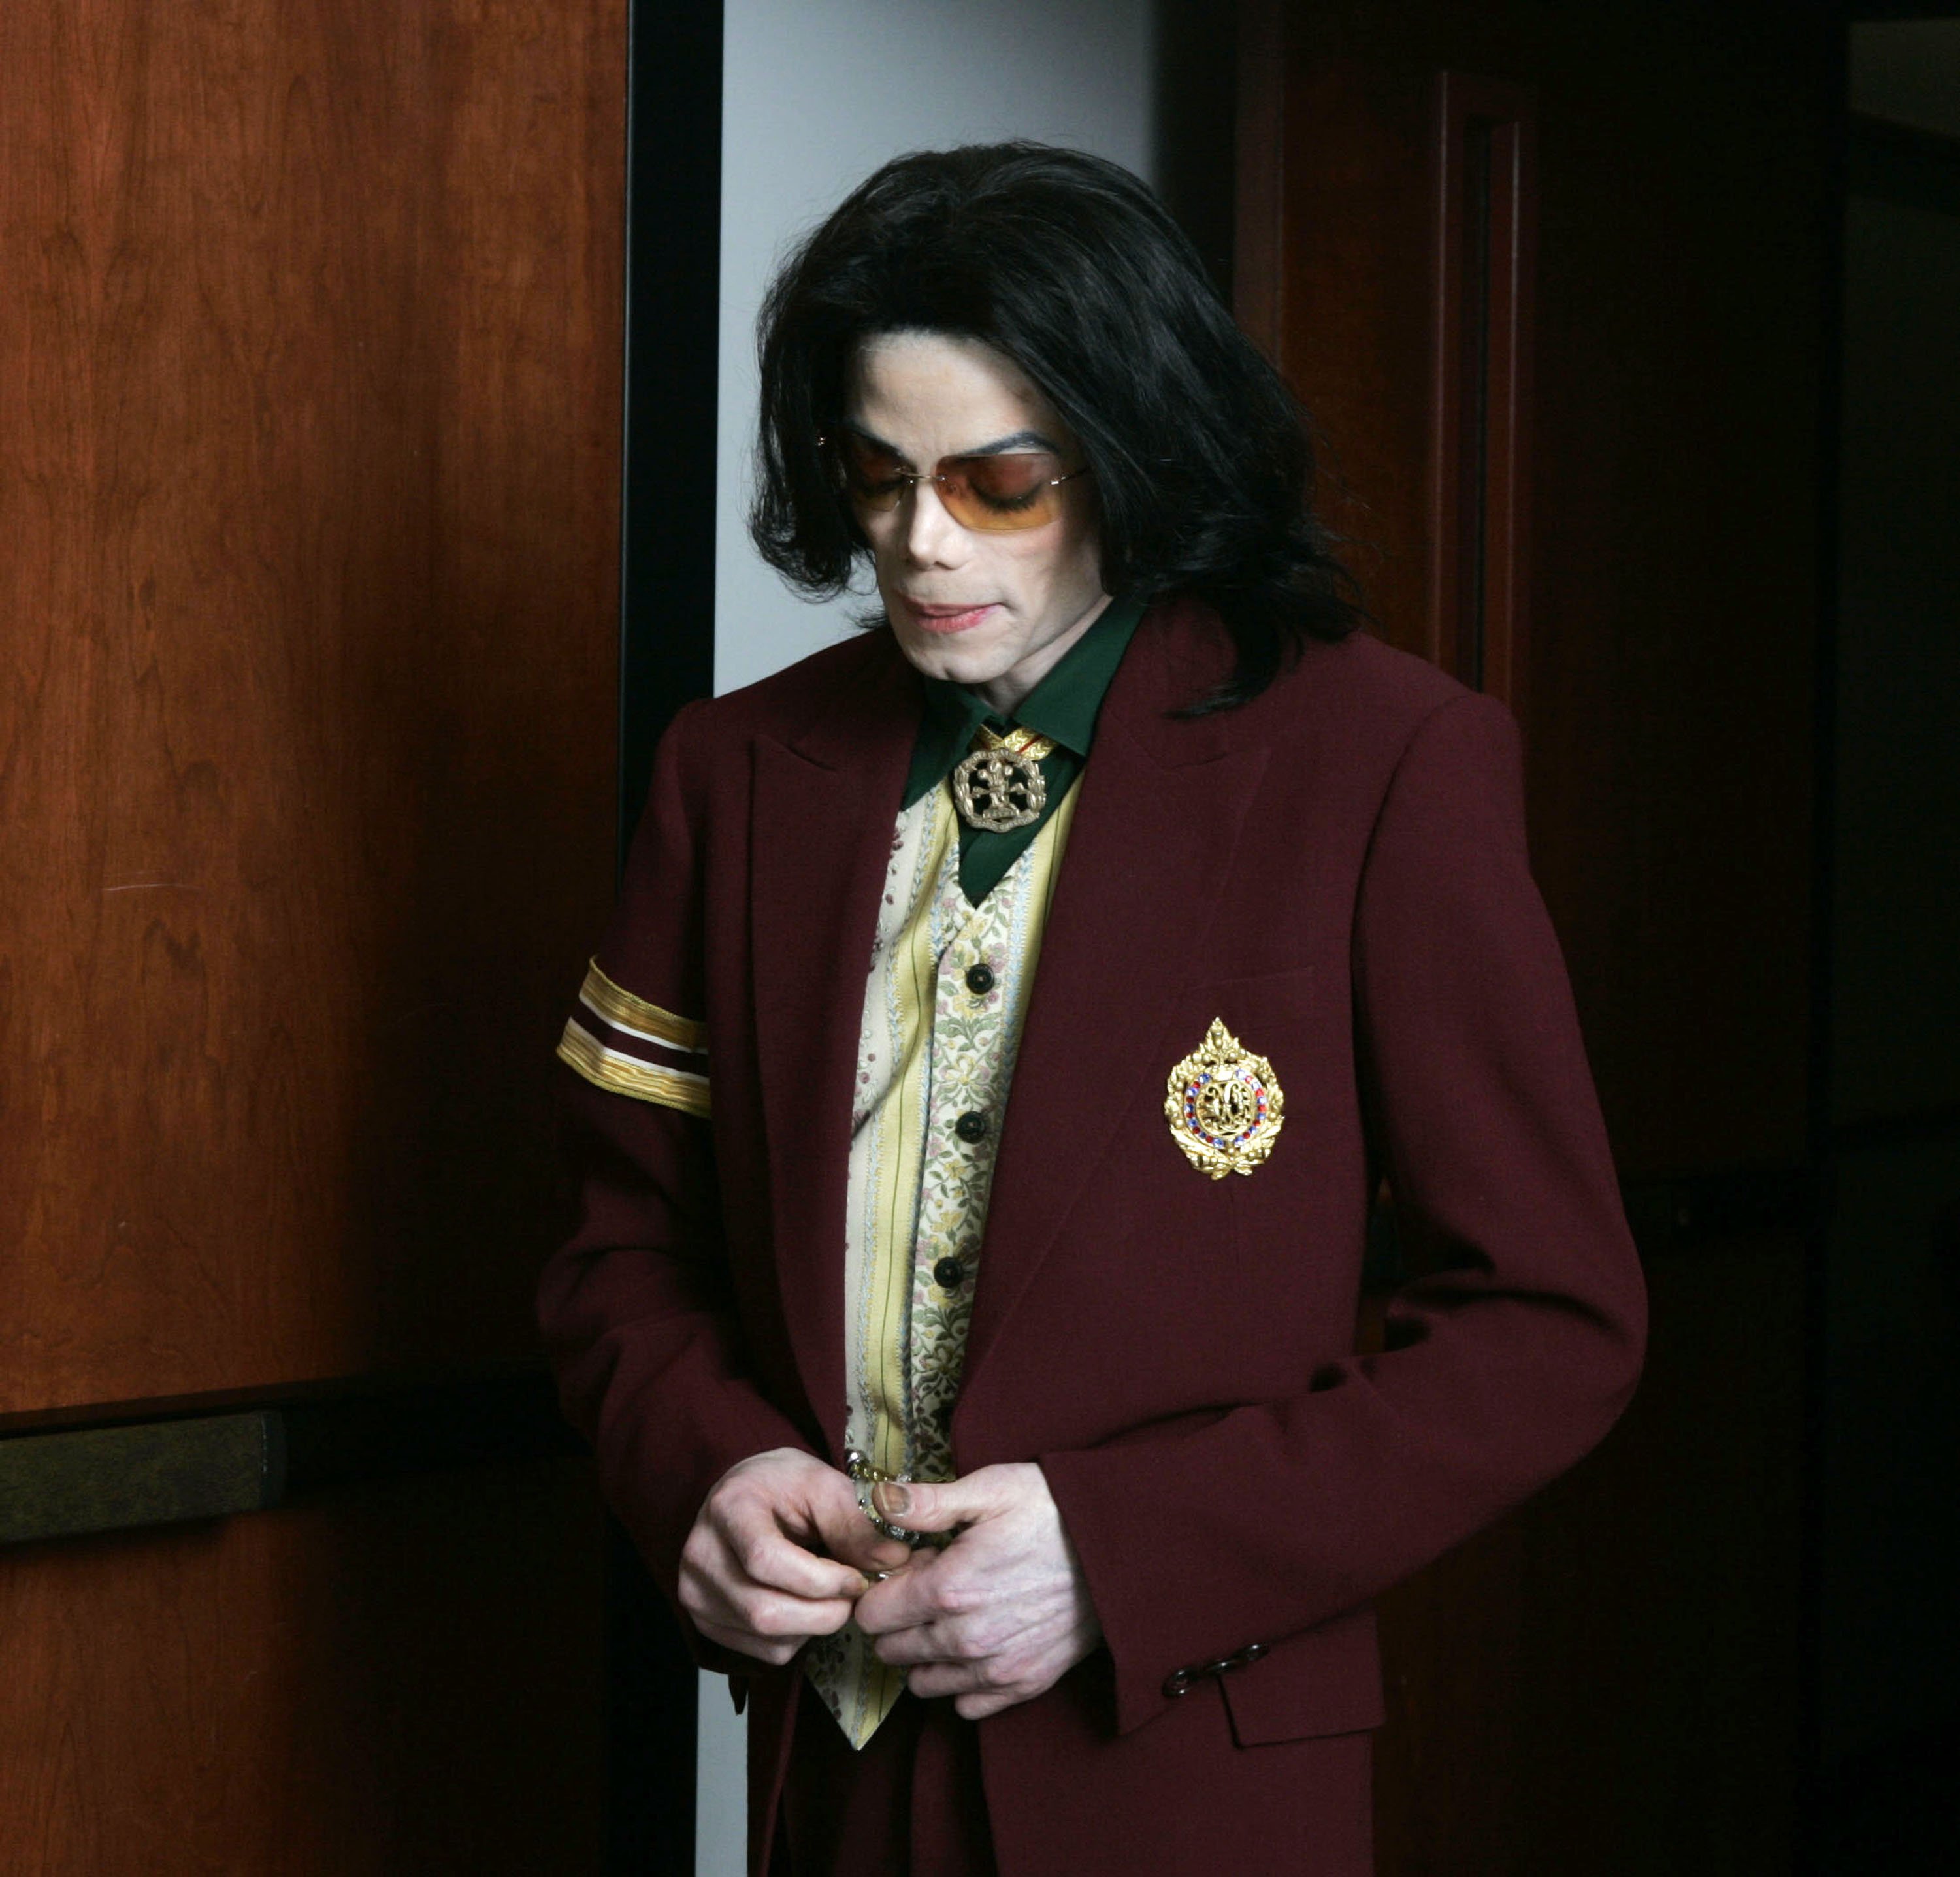 Michael Jackson walking out of the courtroom during a 2005 trial for a 10-count indictment for allegedly molesting a boy. | Photo: Getty Images